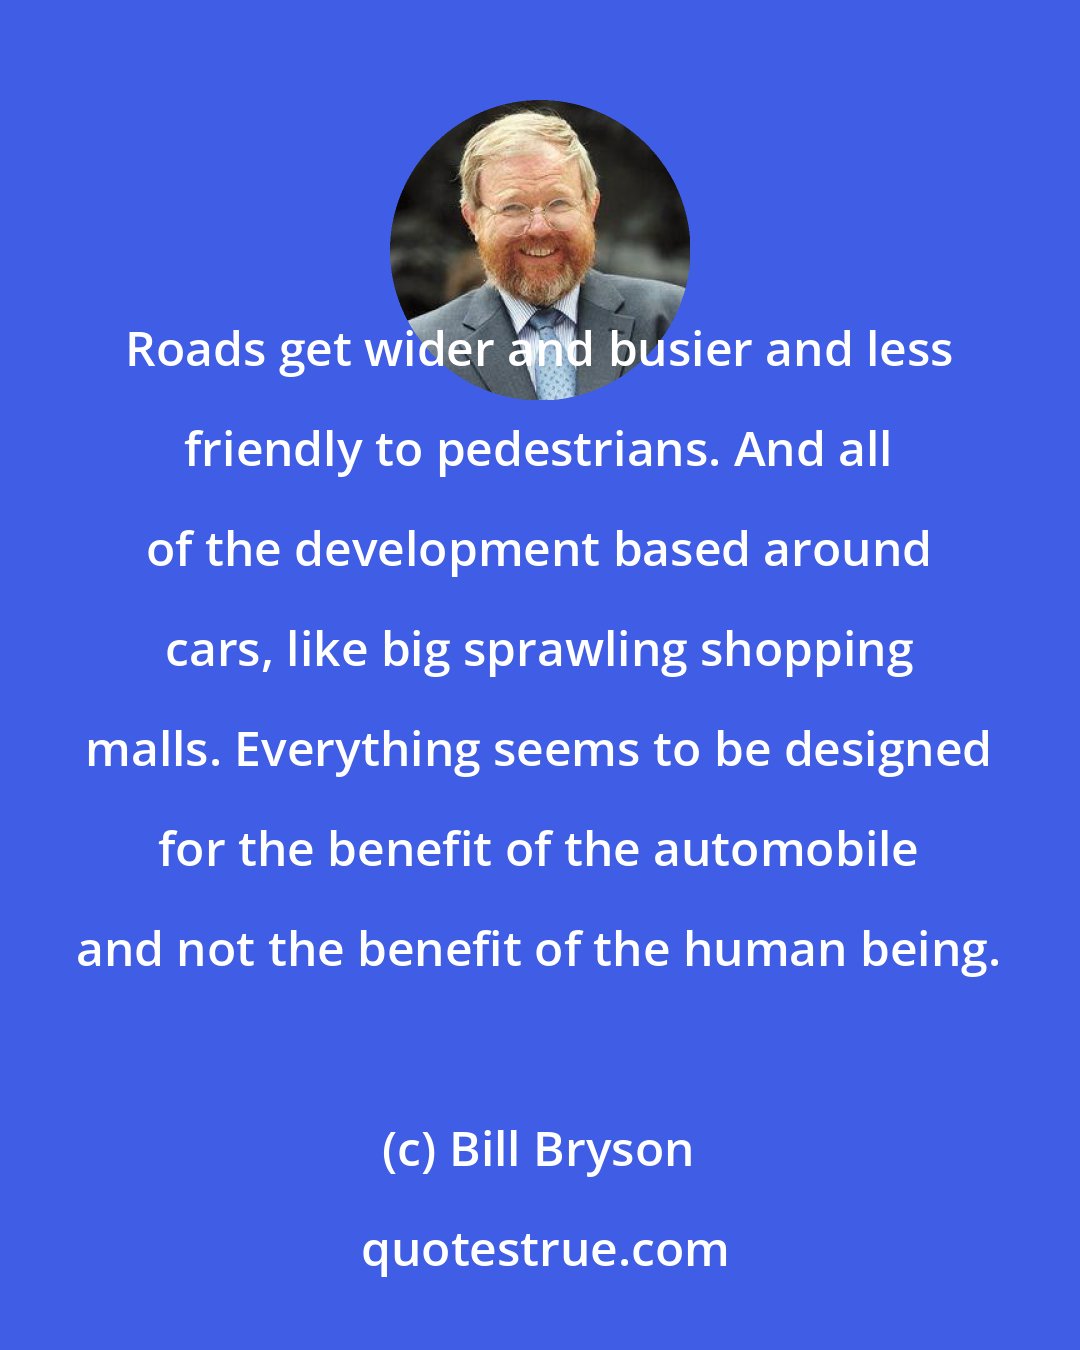 Bill Bryson: Roads get wider and busier and less friendly to pedestrians. And all of the development based around cars, like big sprawling shopping malls. Everything seems to be designed for the benefit of the automobile and not the benefit of the human being.